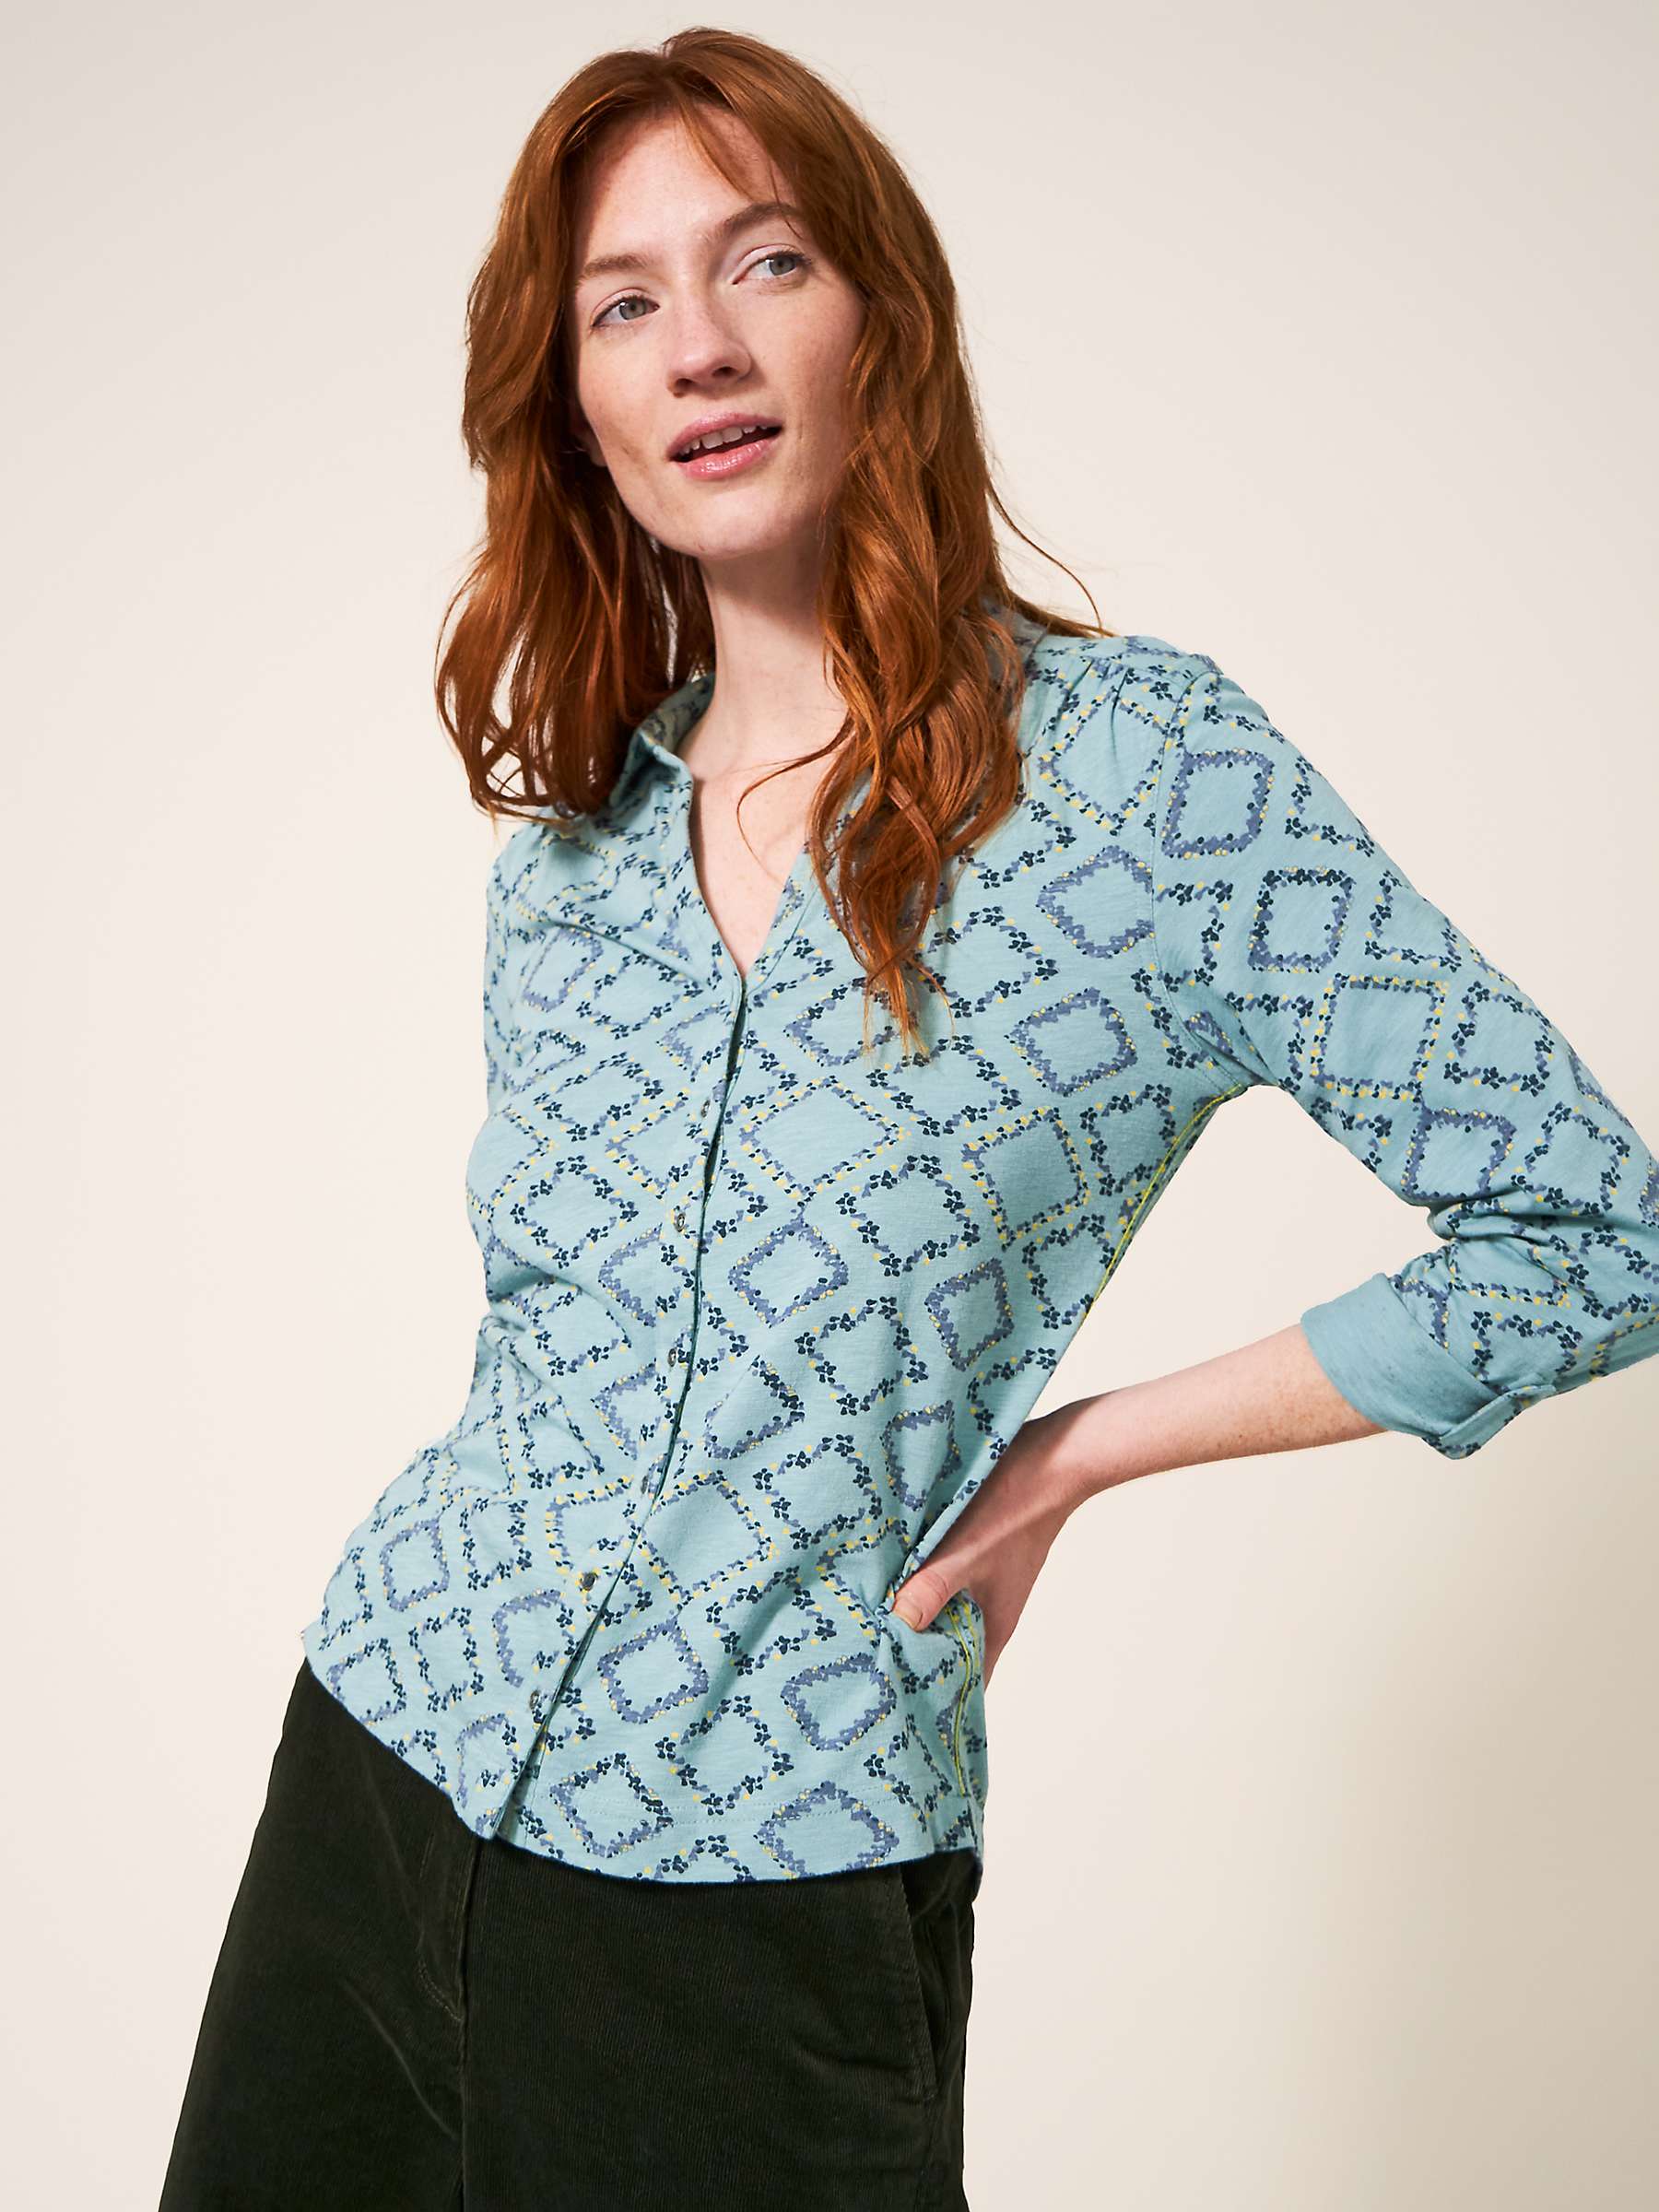 Buy White Stuff Annie Geometric Jersey Shirt, Teal Online at johnlewis.com